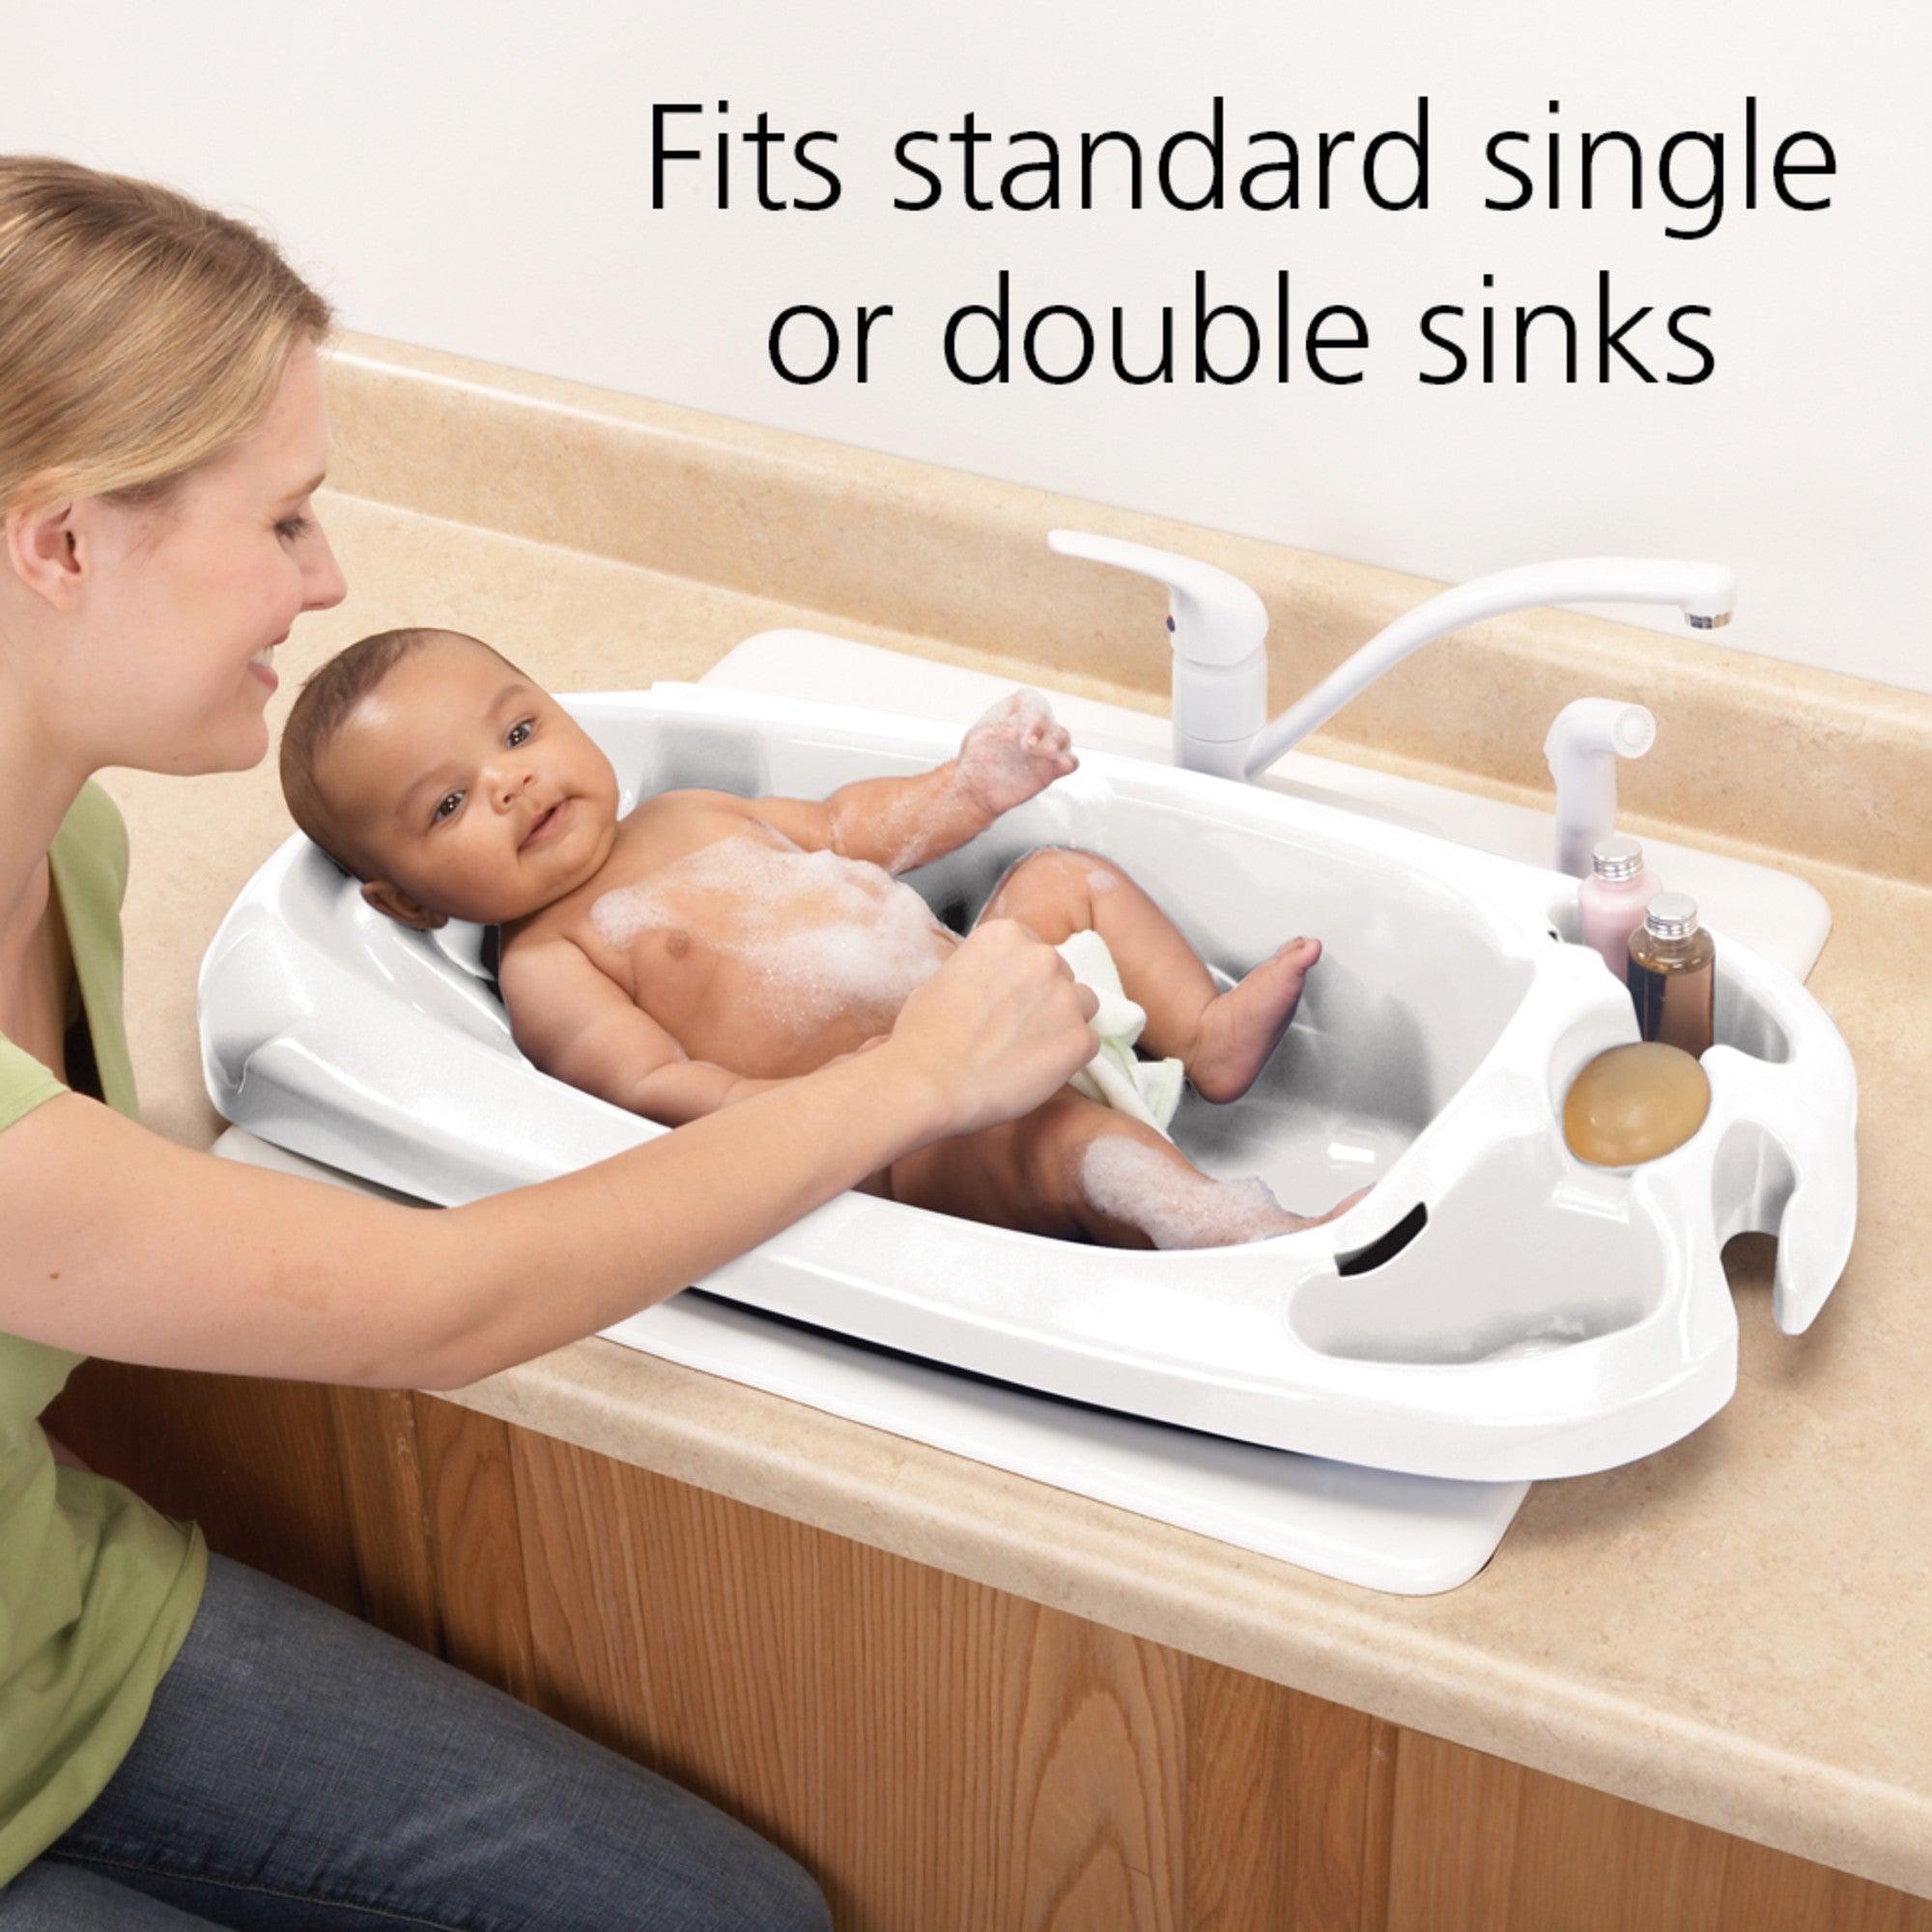 Newborn to Toddler Bathtub - fits standard single or double sinks